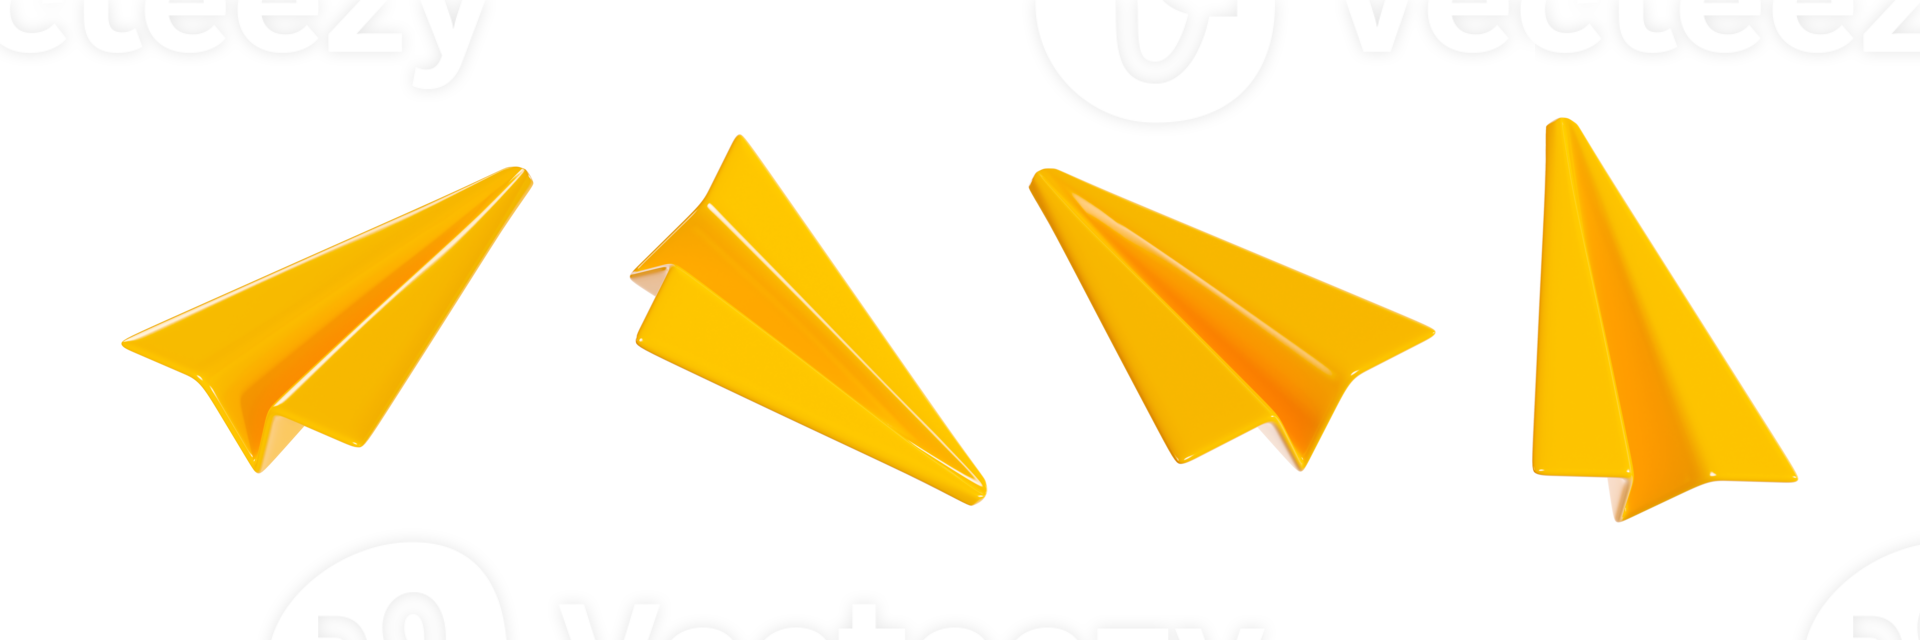 Paper plane 3d render - set of cartoon yellow origami airplane icon for email or new message concept. png